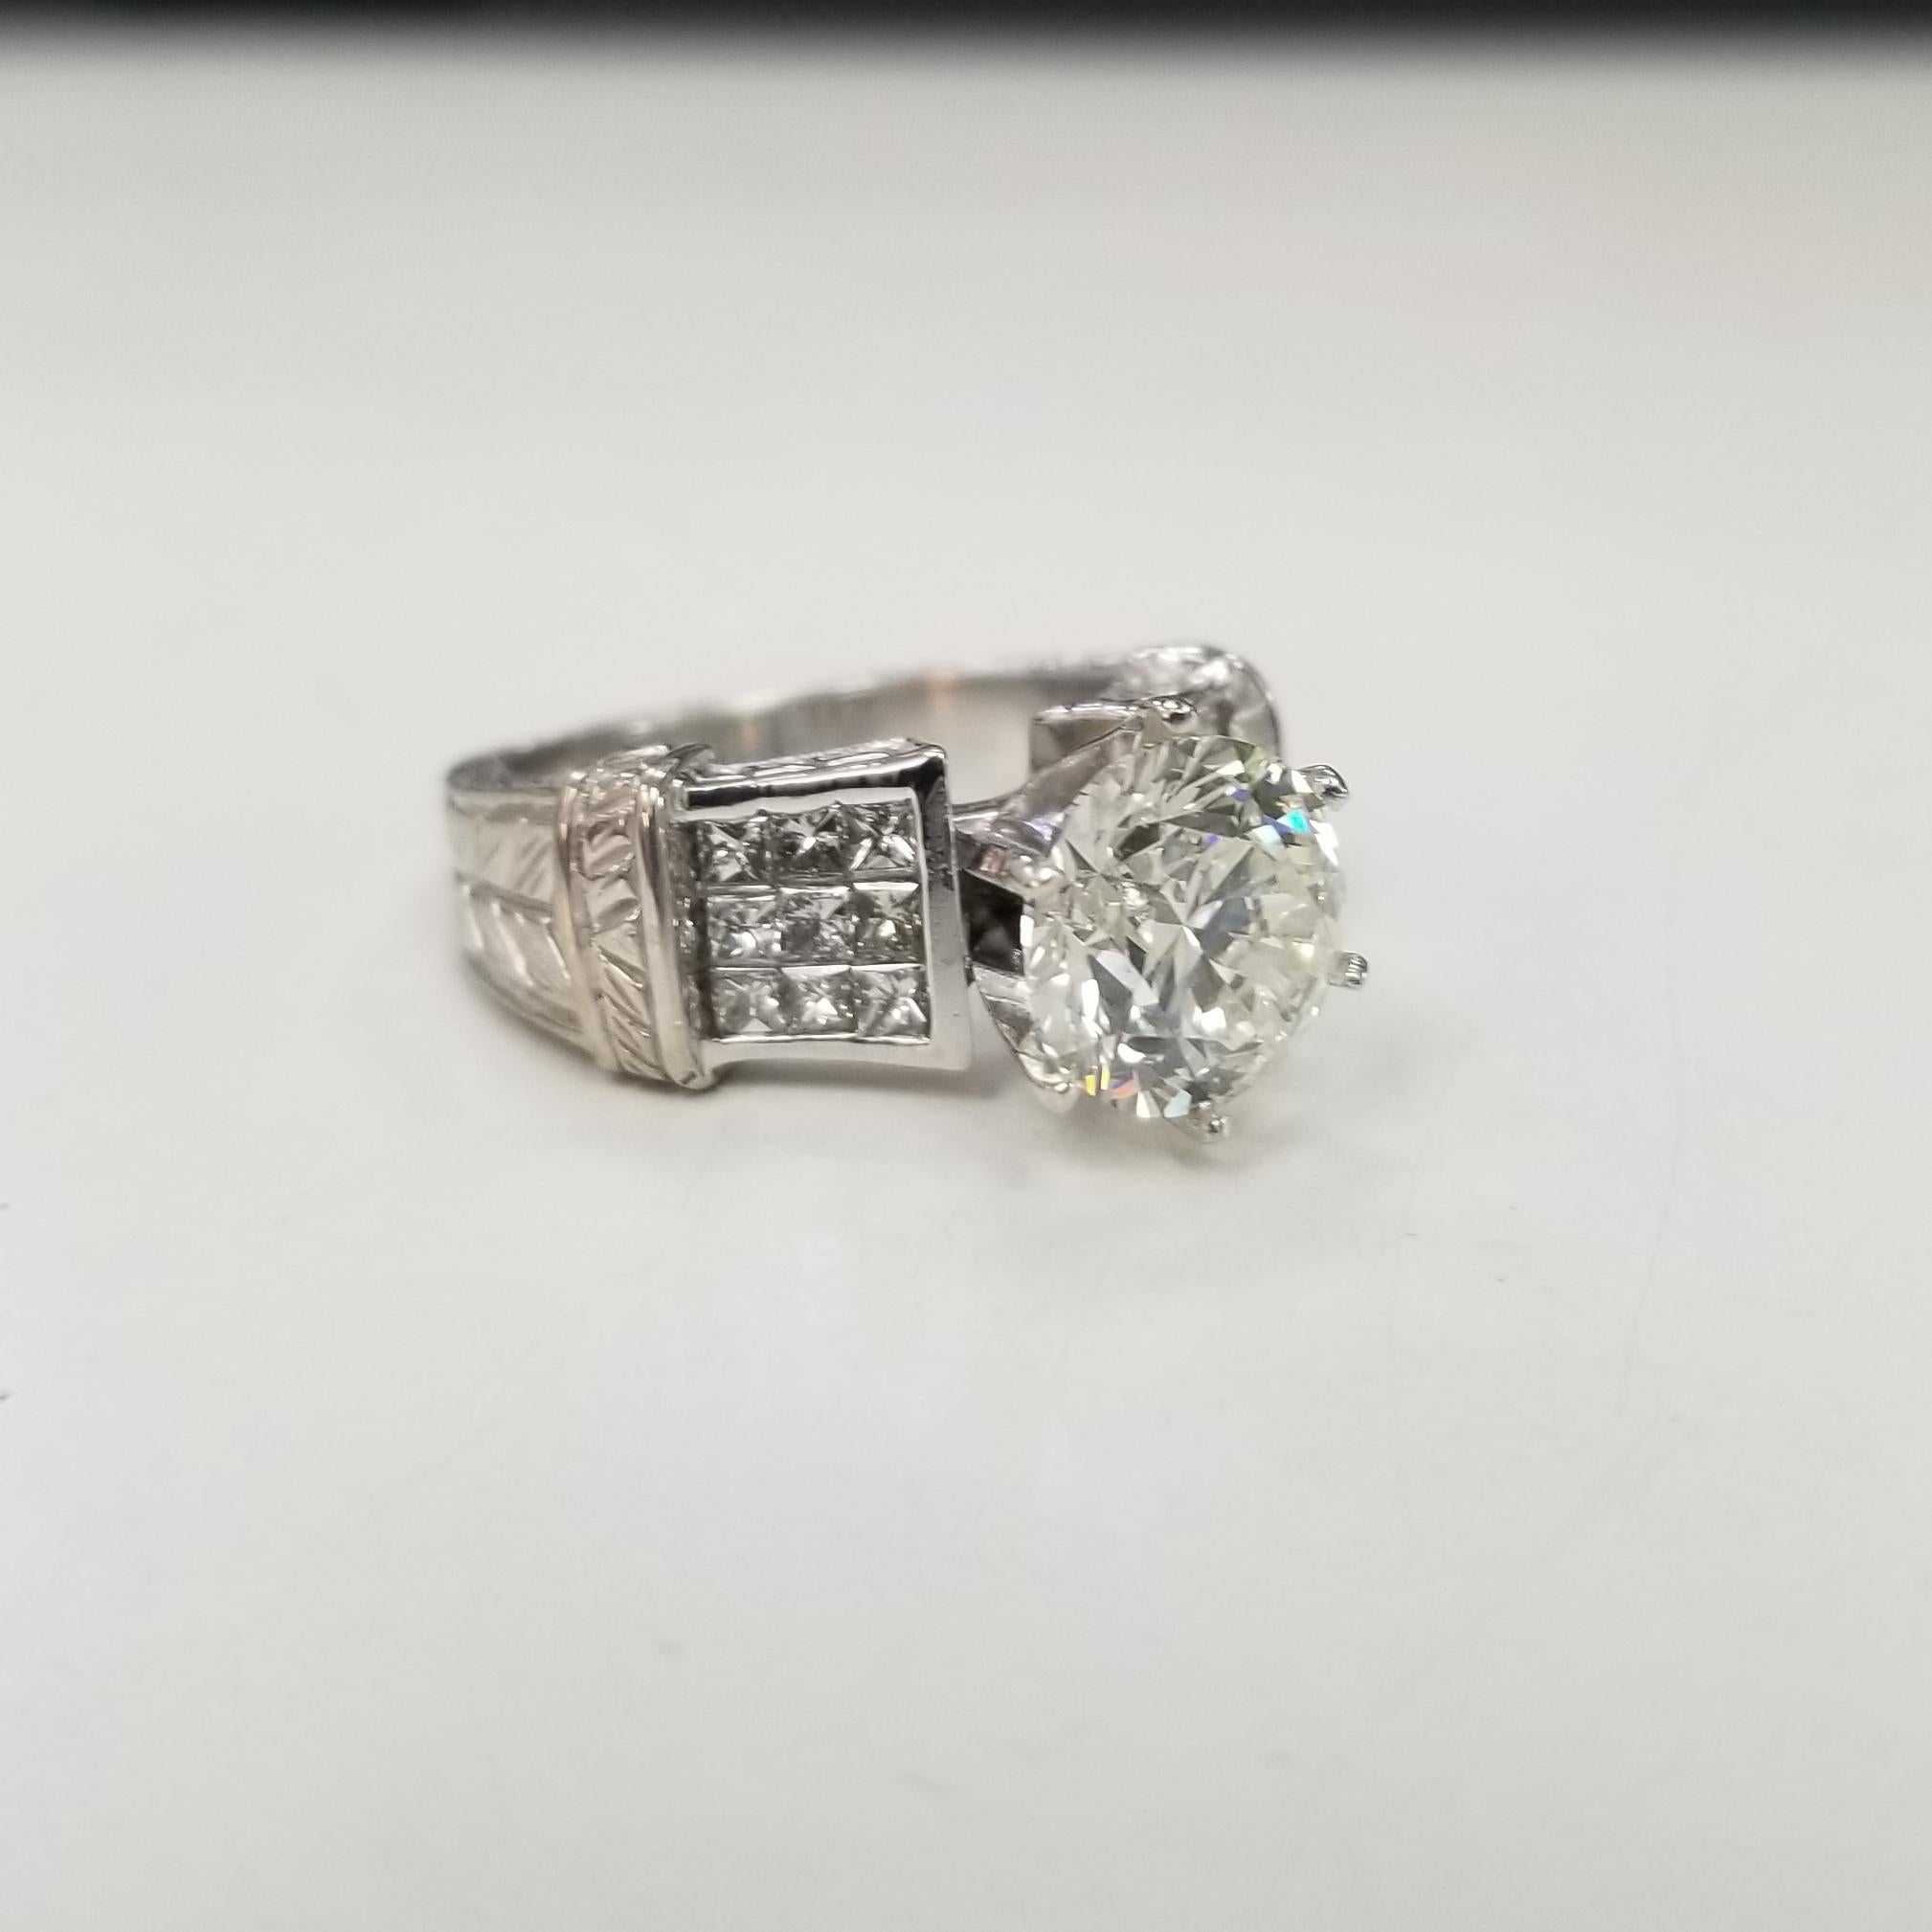 This is a 18k white gold ring with invisible set princess diamonds . The diamonds are tightly set close together to form a diamond invisible set. It weighs 11 grams set in 18k white gold. The ring size is currently 6.5 US, but can be resized for